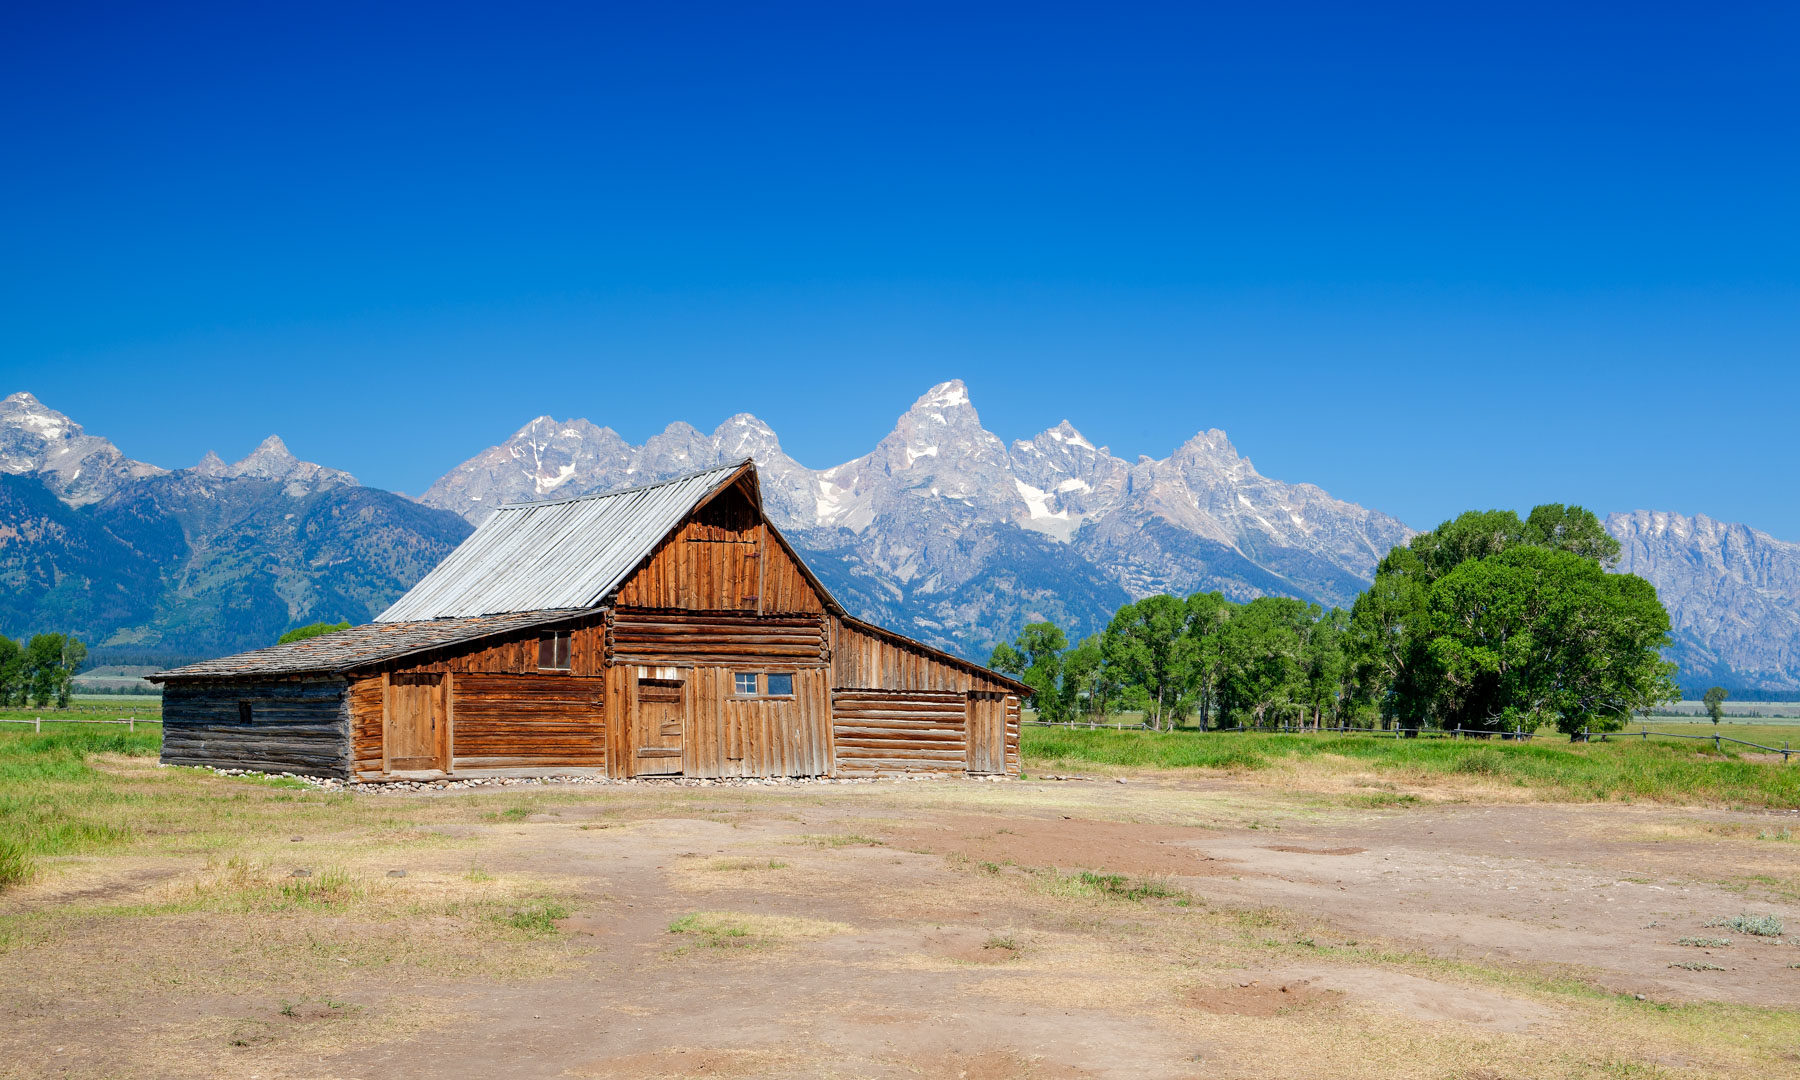 The Best Hotels in Jackson Hole, Wyoming